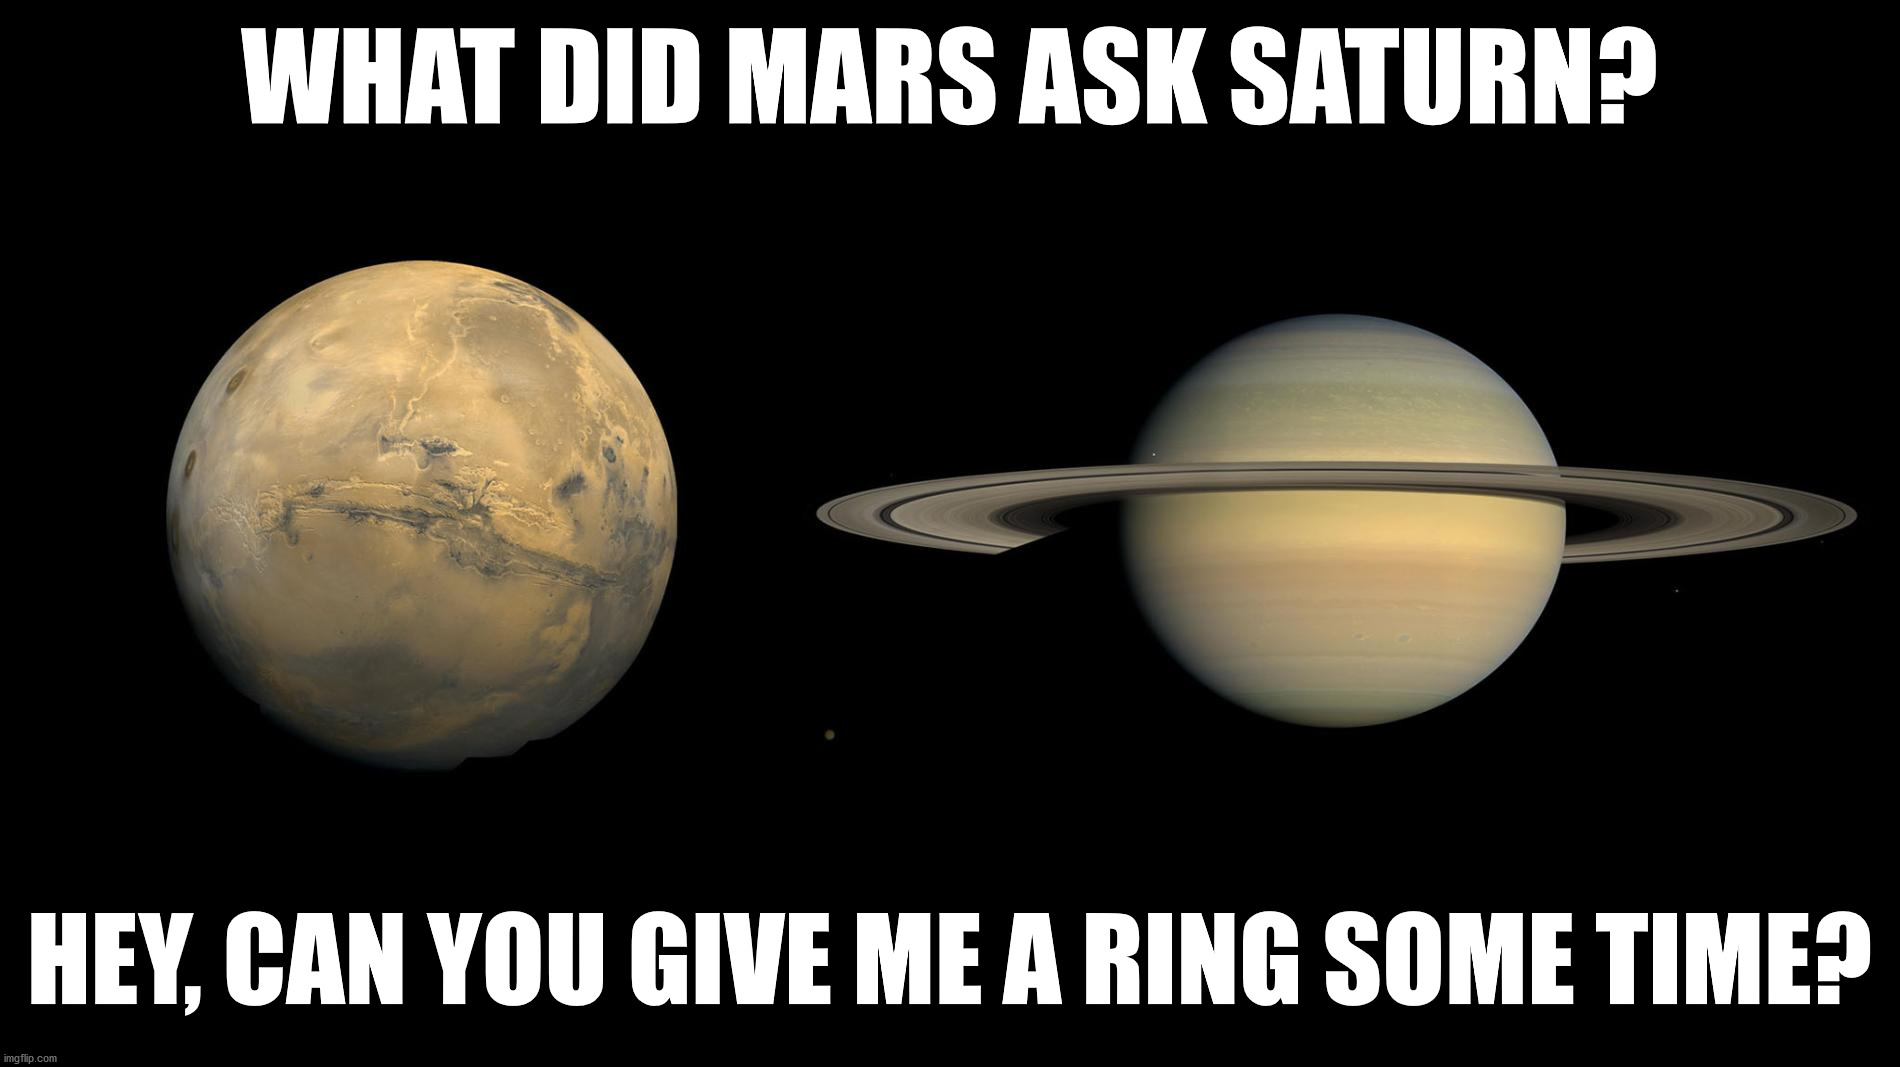 WHAT DID MARS ASK SATURN? HEY, CAN YOU GIVE ME A RING SOME TIME? | made w/ Imgflip meme maker